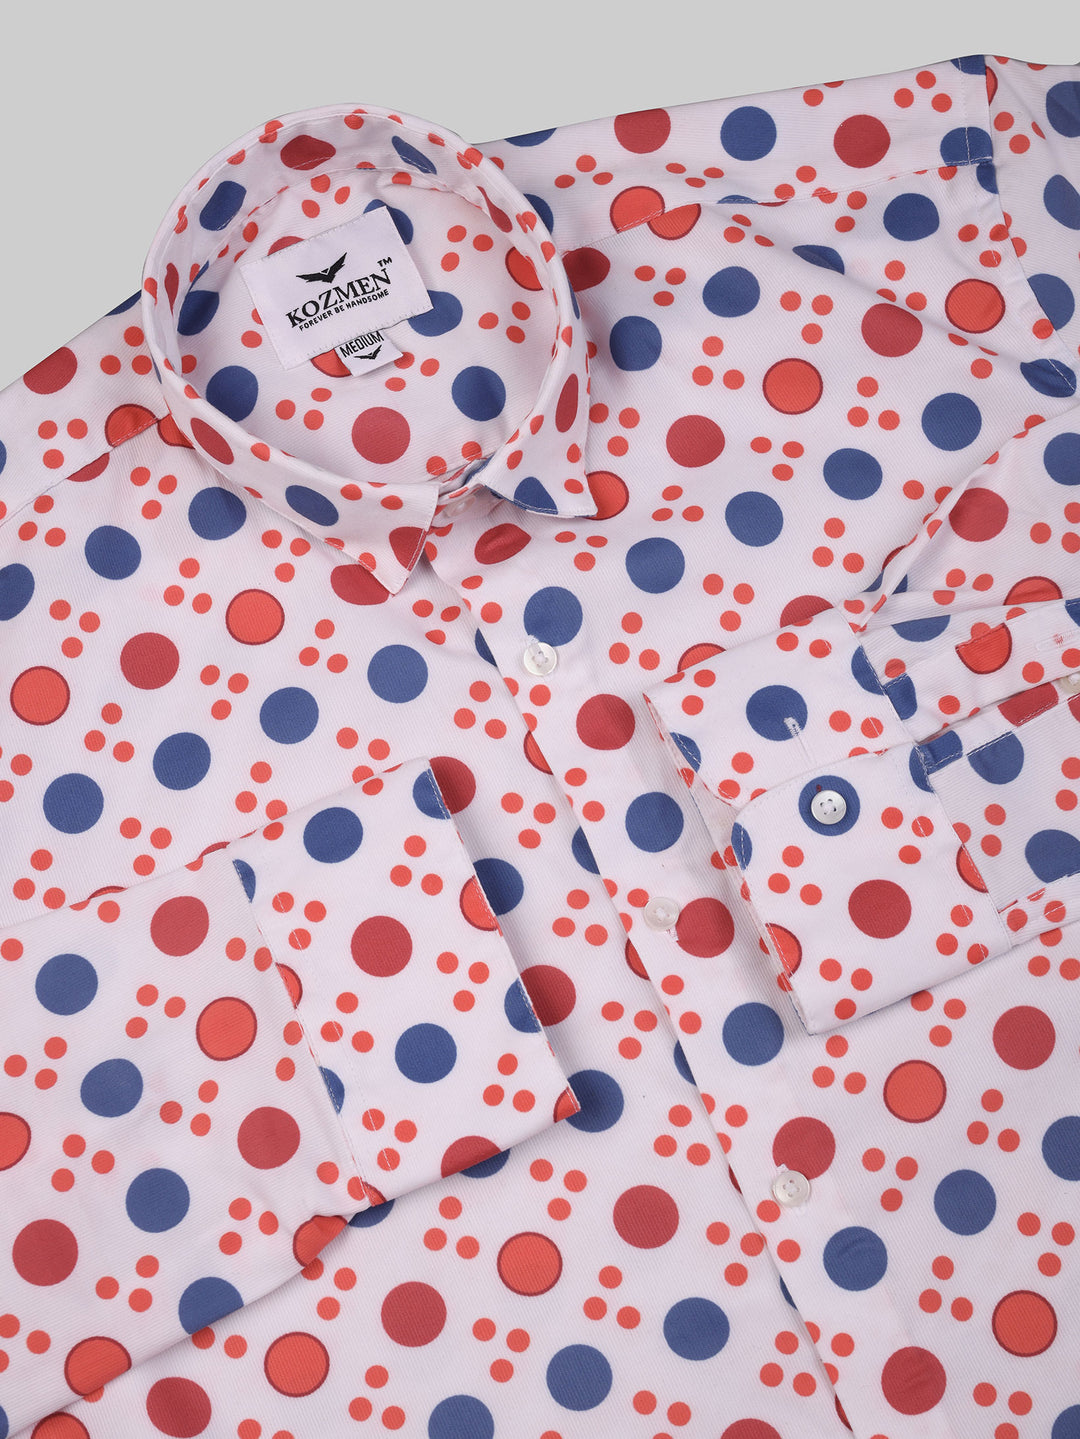 White Polka Dot Shirt with Red, Orange, and Blue Accents Cotton Shirt for men